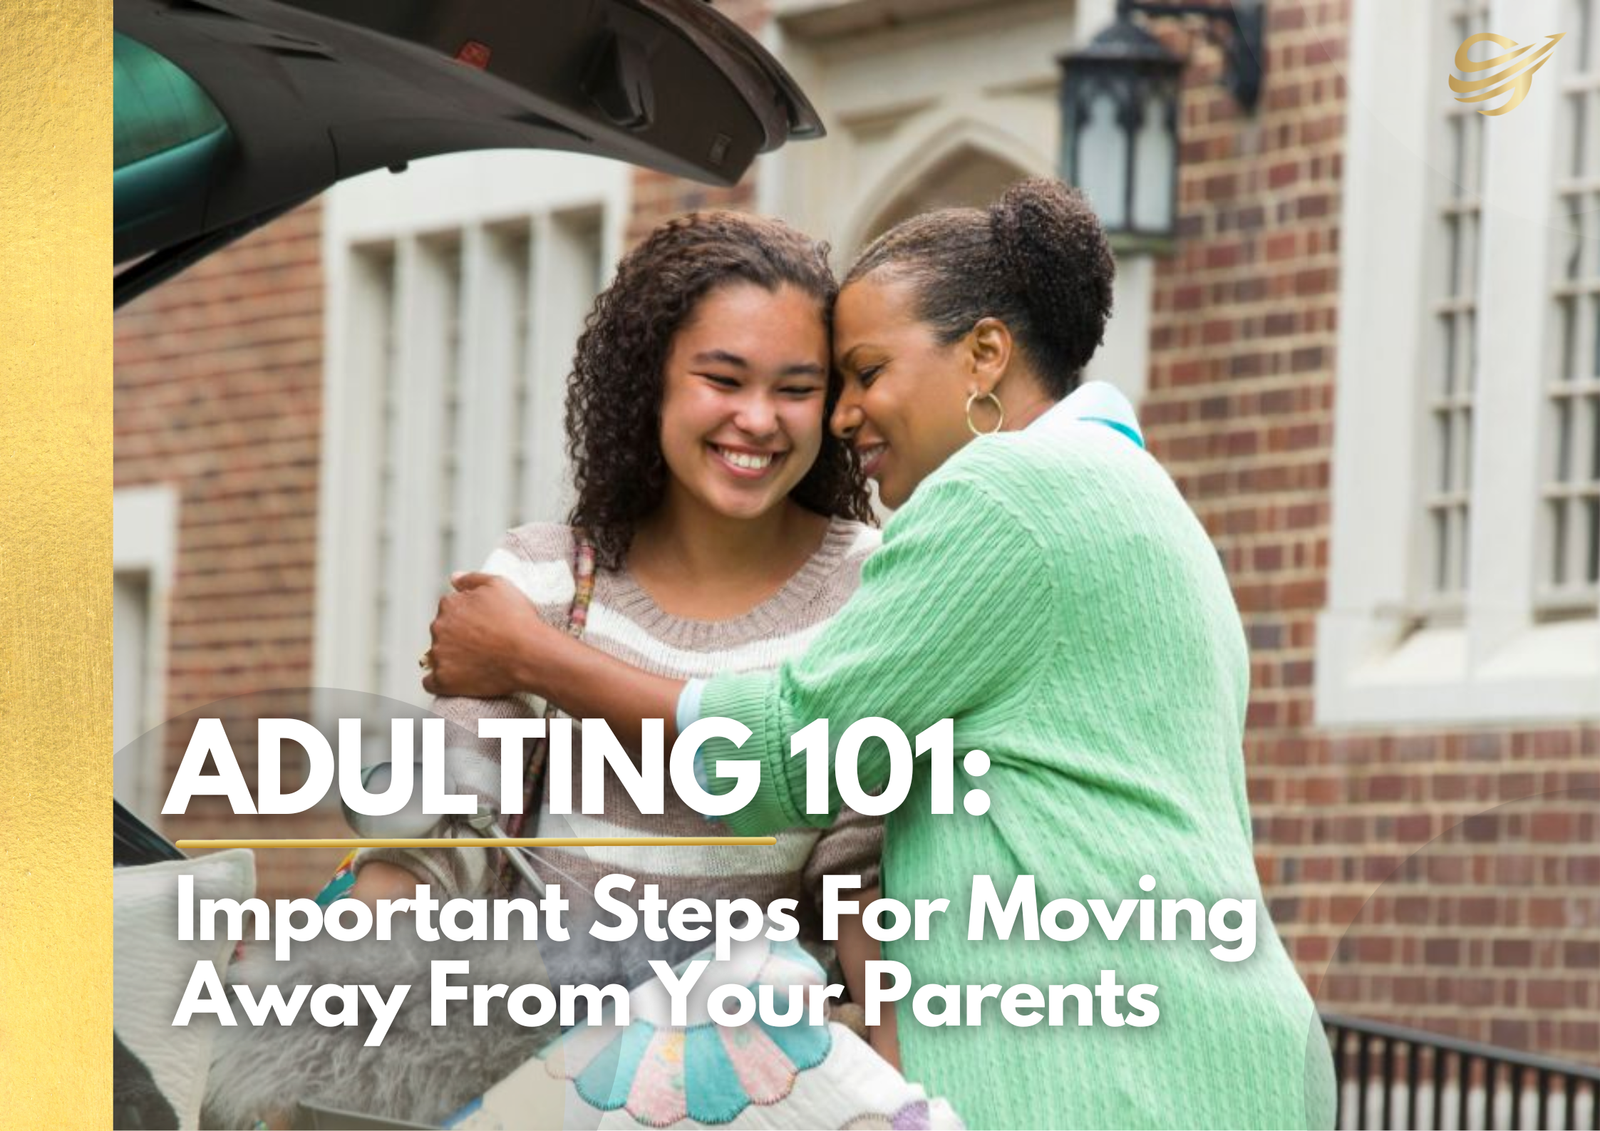 ADULTING 101: Important Steps For Moving Away From Your Parents